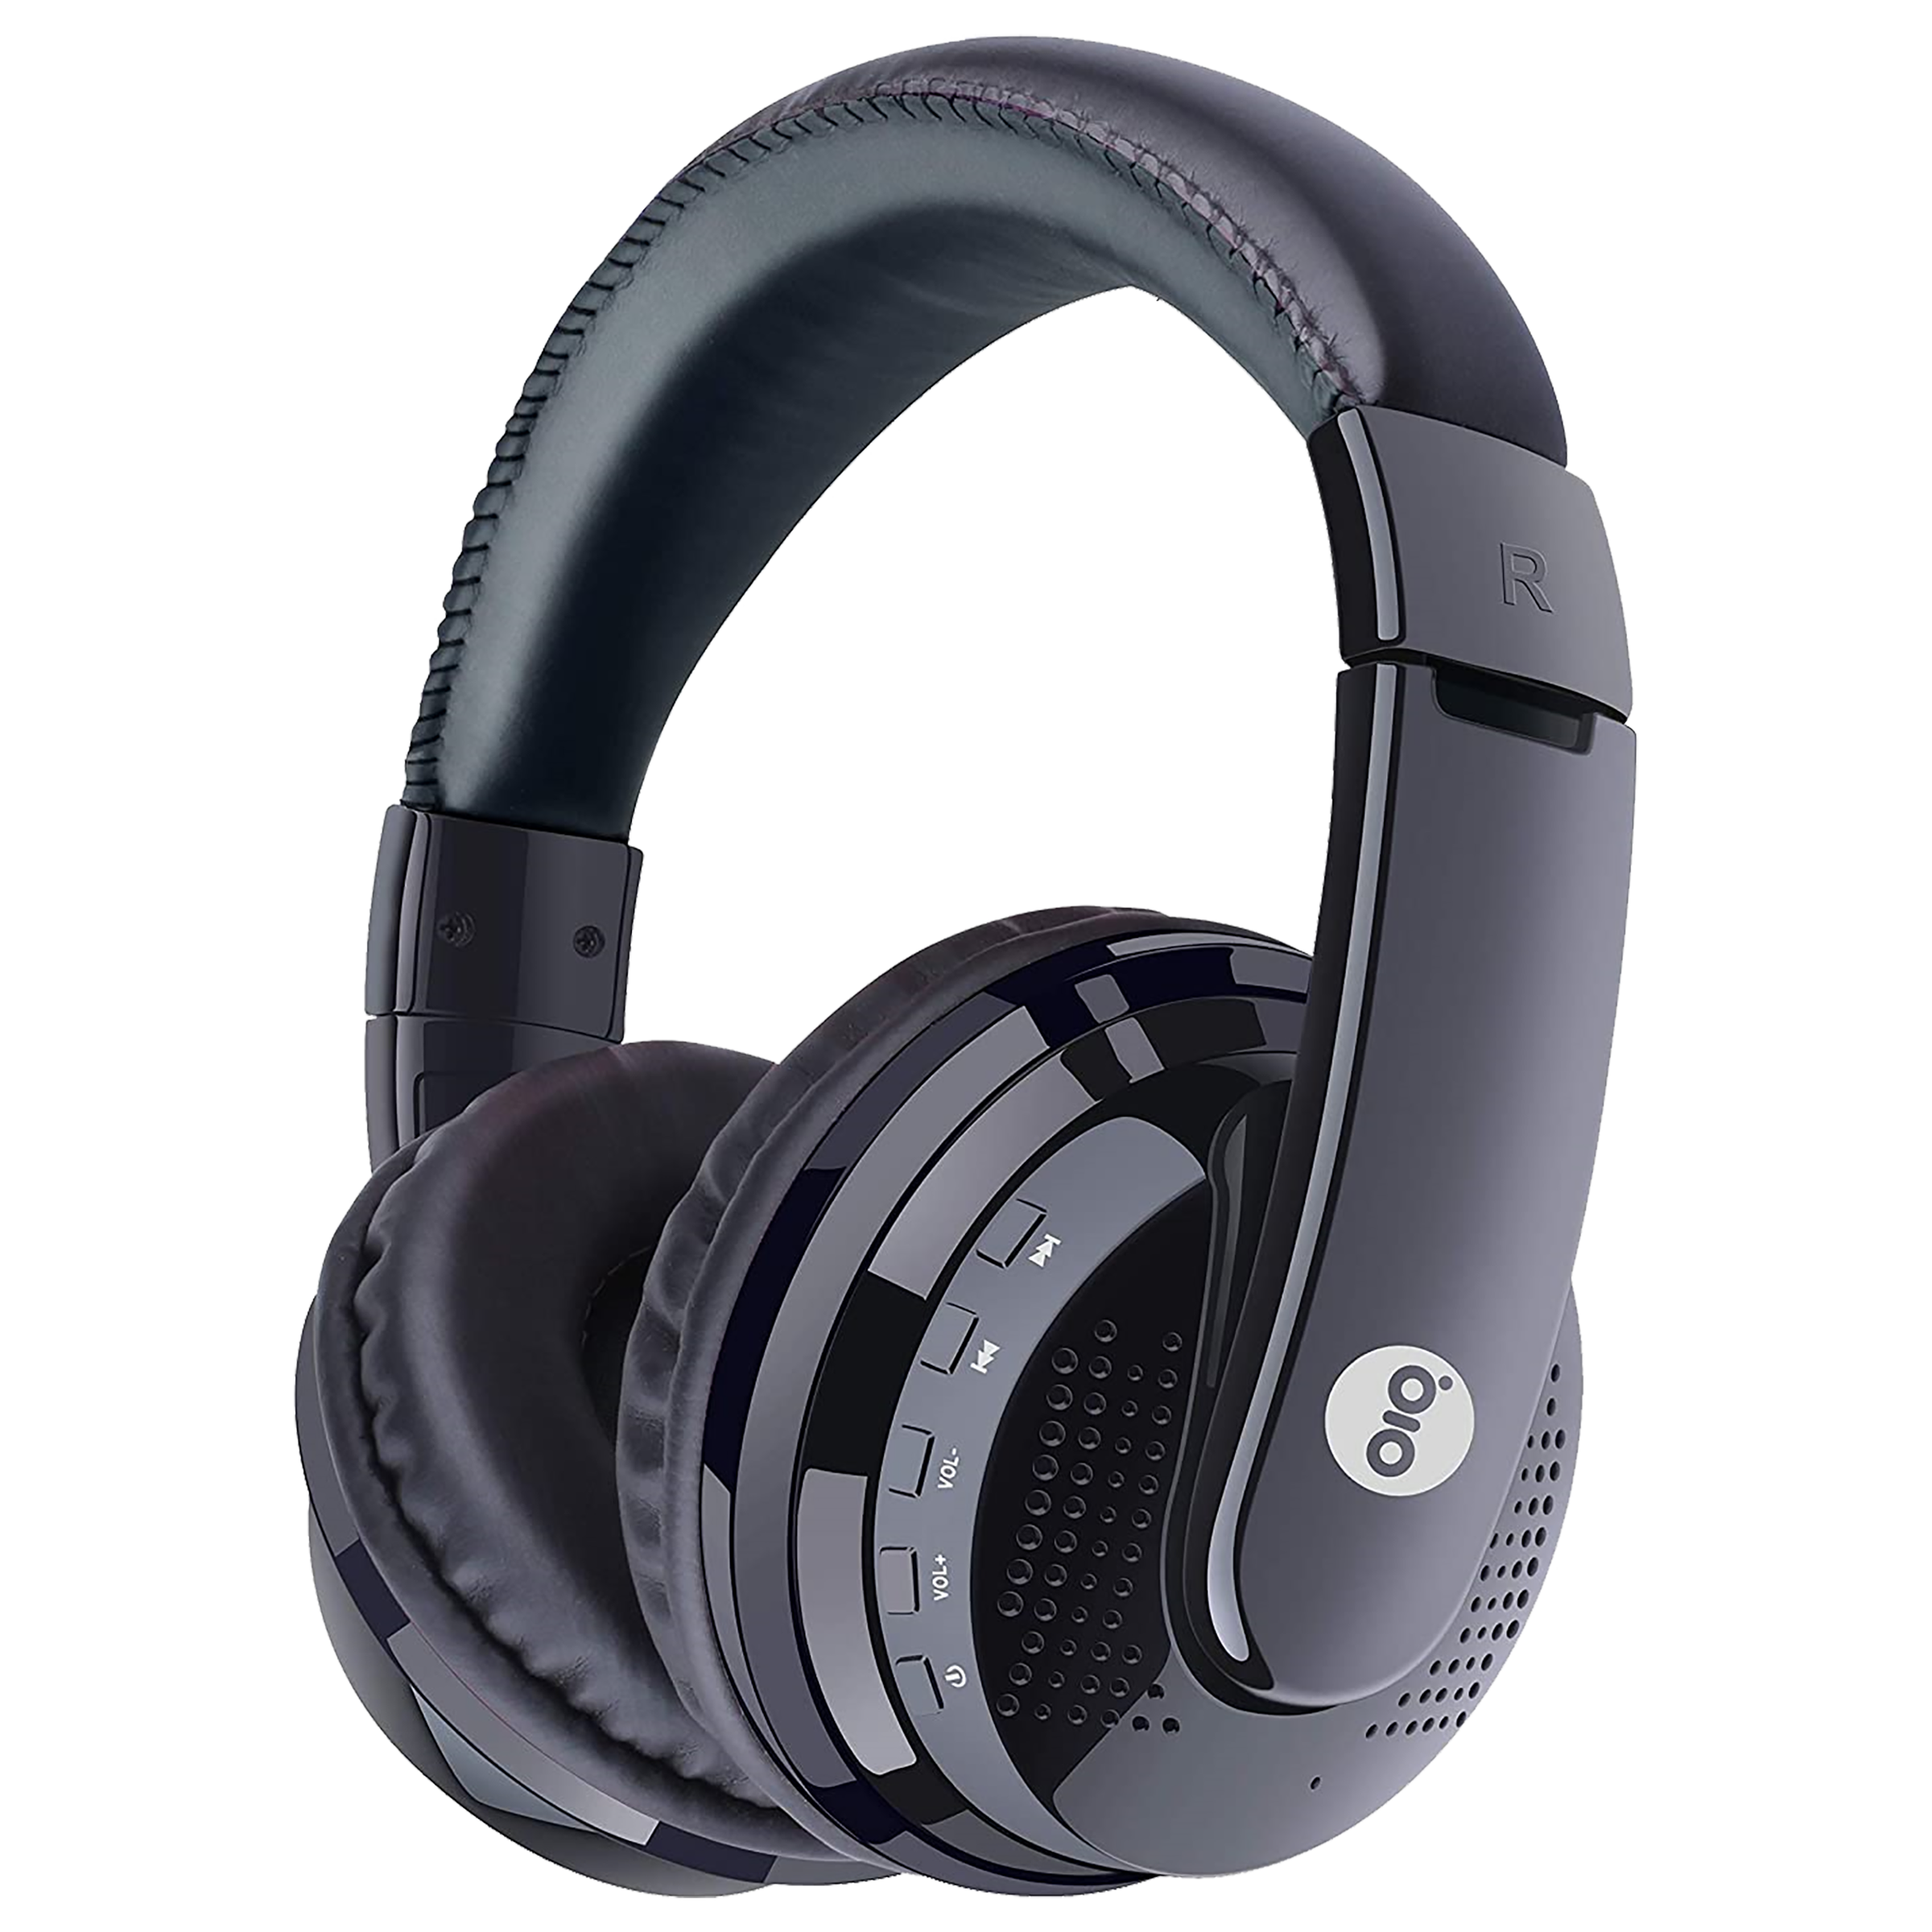 Gizmore Giz Over-Ear MH411 Passive Noise Cancellation Wireless Headphone with Mic (Bluetooth 5.0, Built-In Microphone, Black)_1